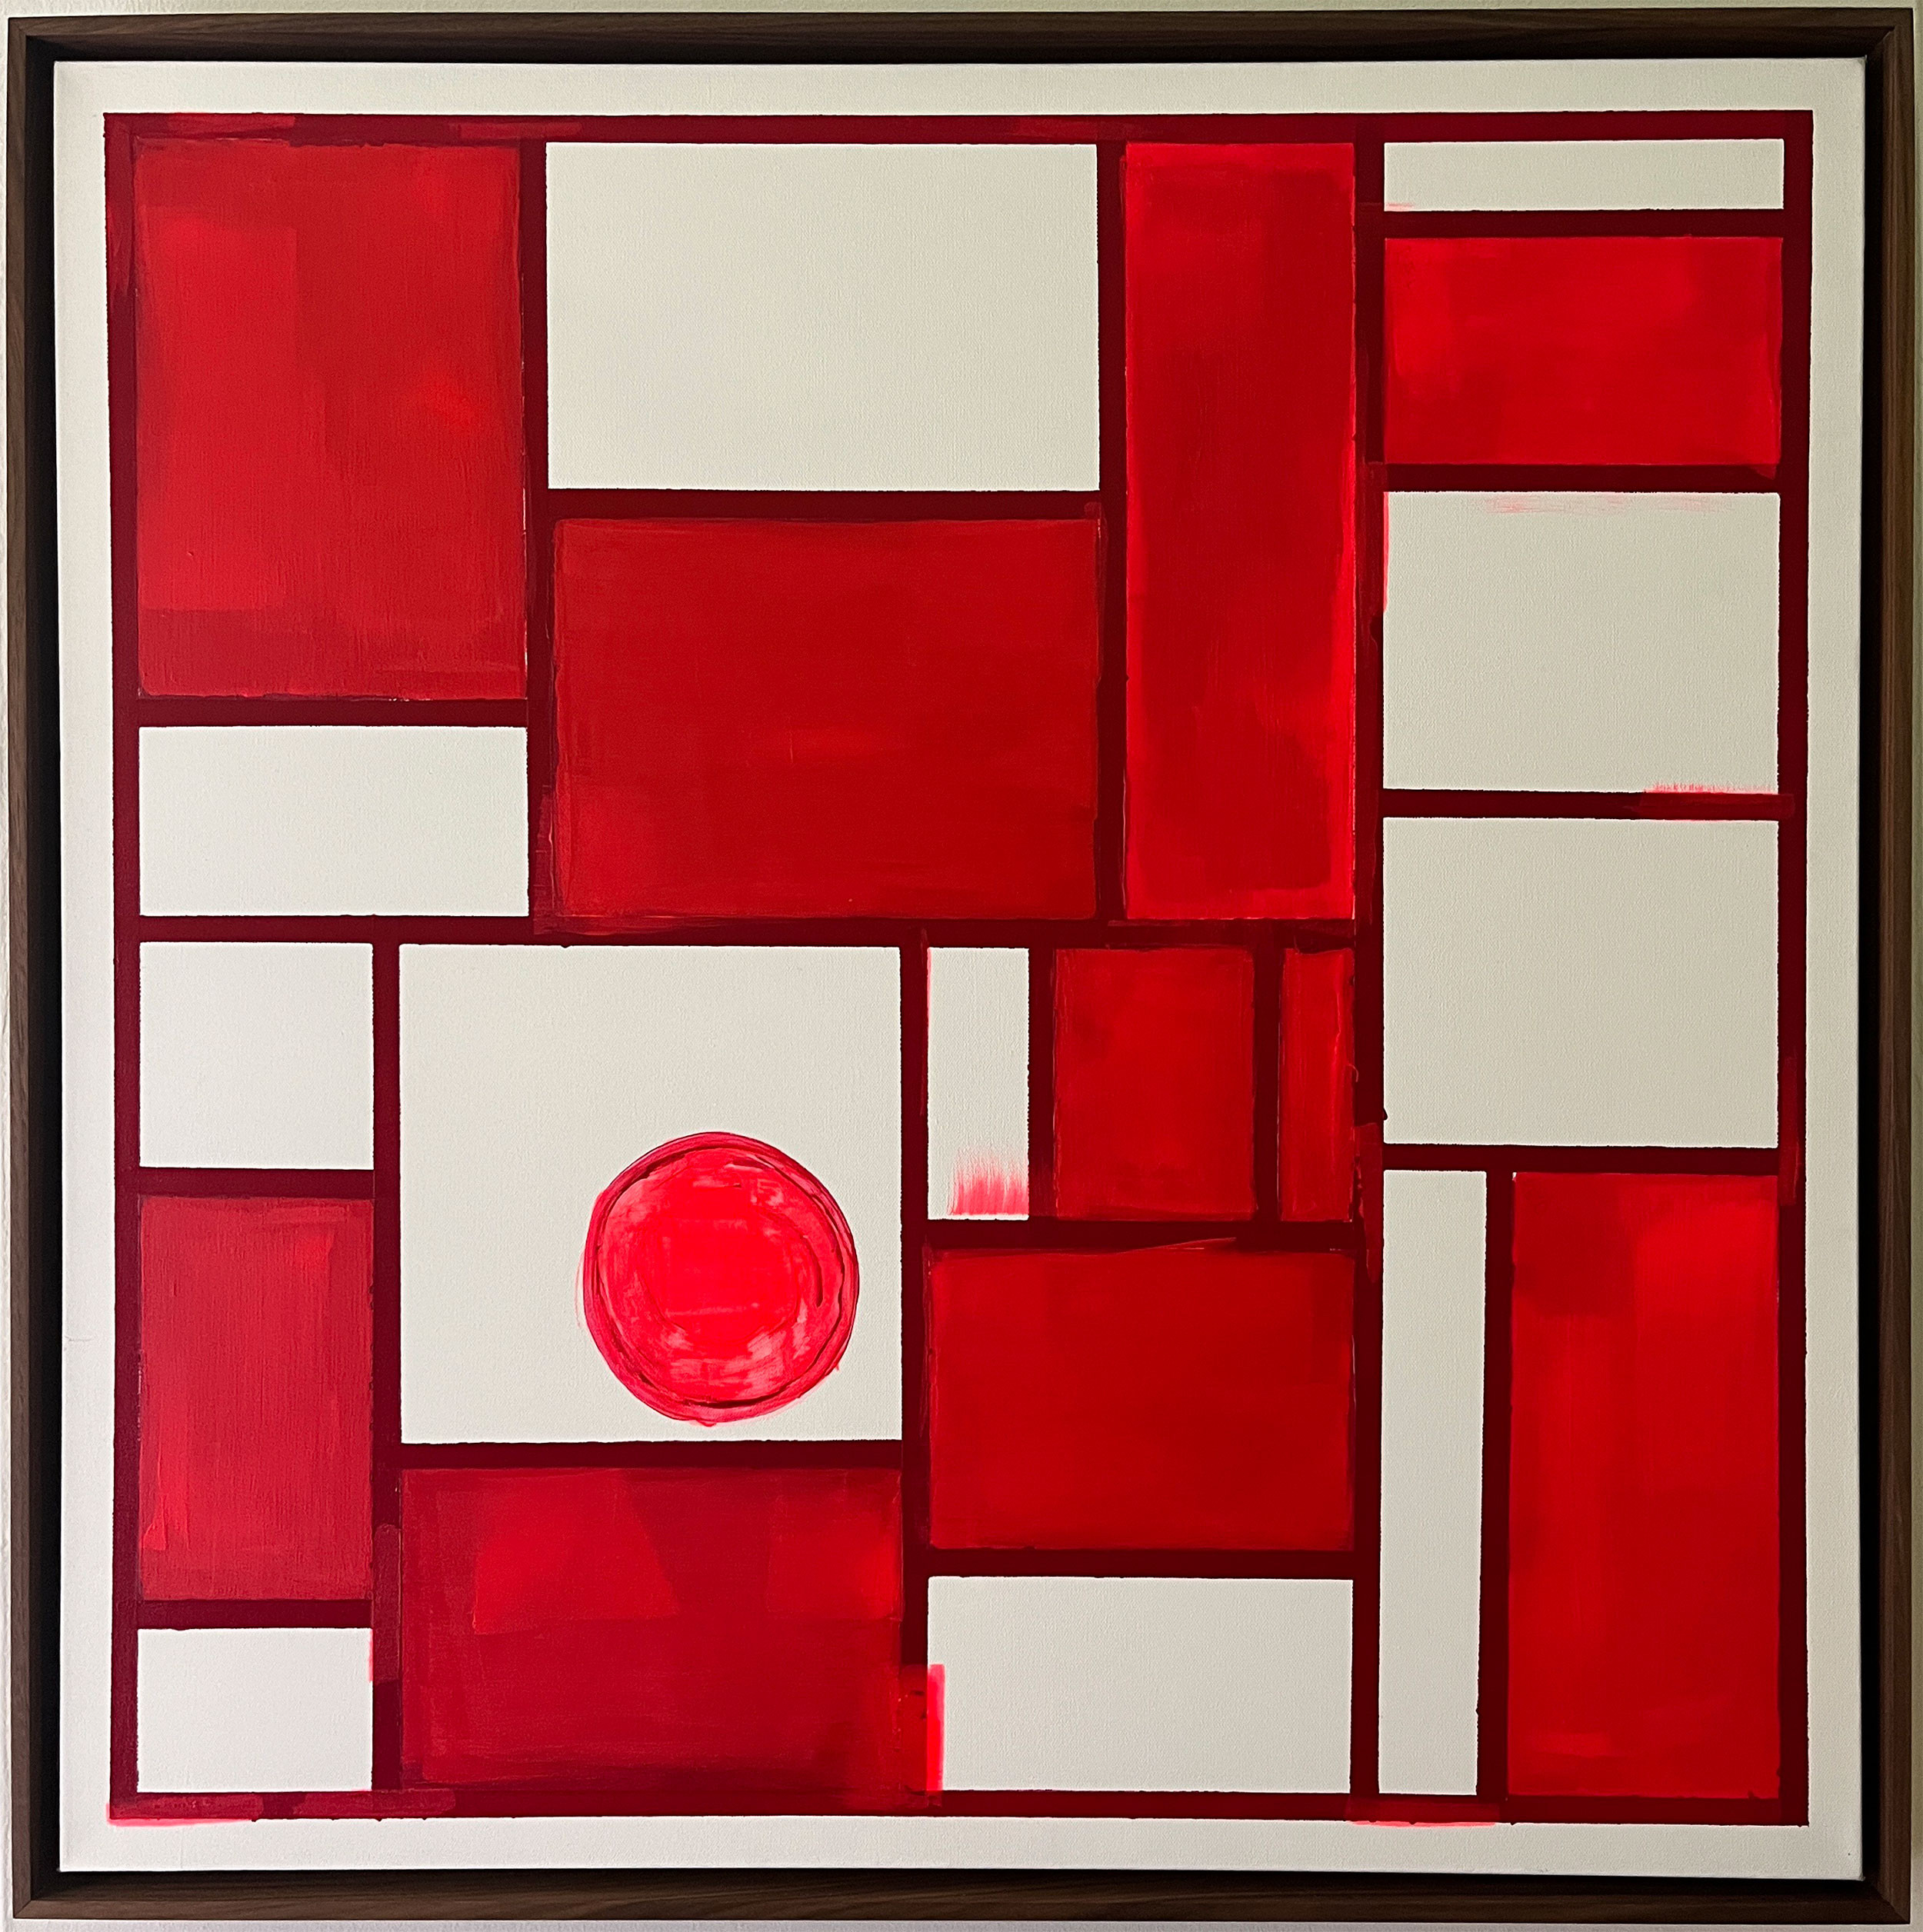 A geometric painting with heavy outlines and various rectangles in shades of red with neon red accents. Some rectangles are filled in with red, others are only outlined in red. There's a neon red circle in one of the outlined rectangles.